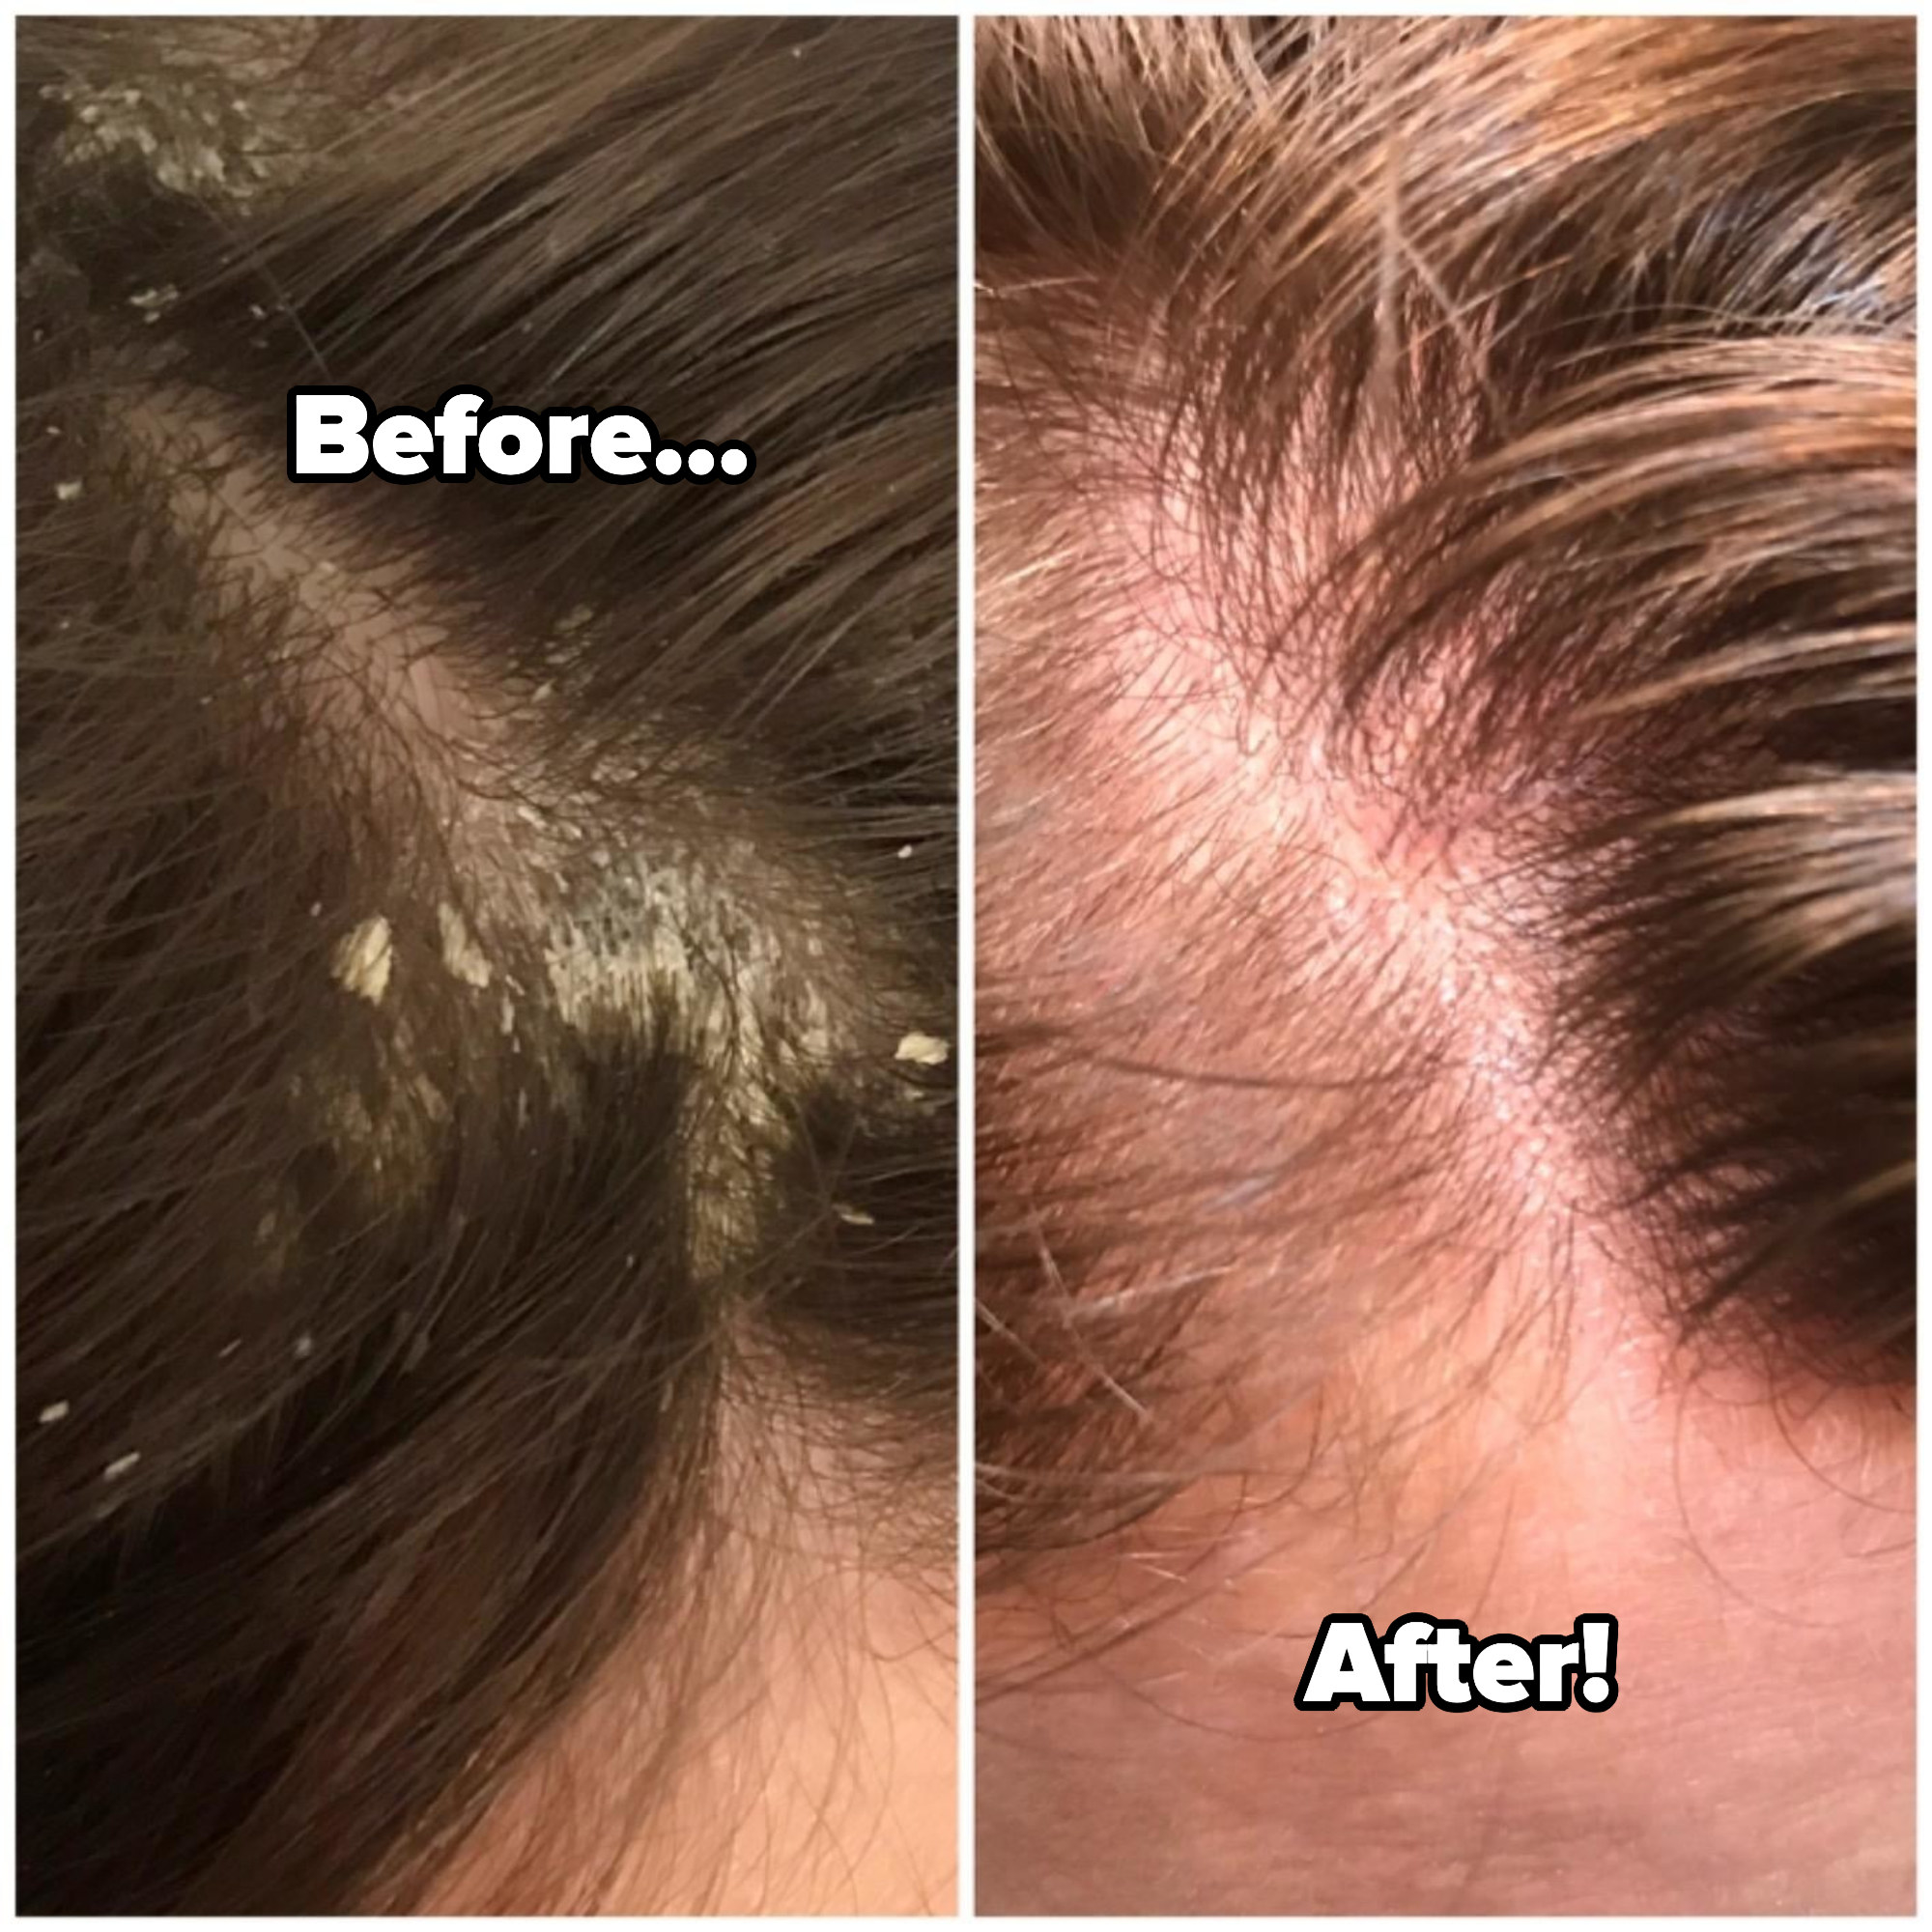 Reviewer before and after photos showing a flaky scalp next to one that&#x27;s flake-free after using the anti-dandruff shampoo